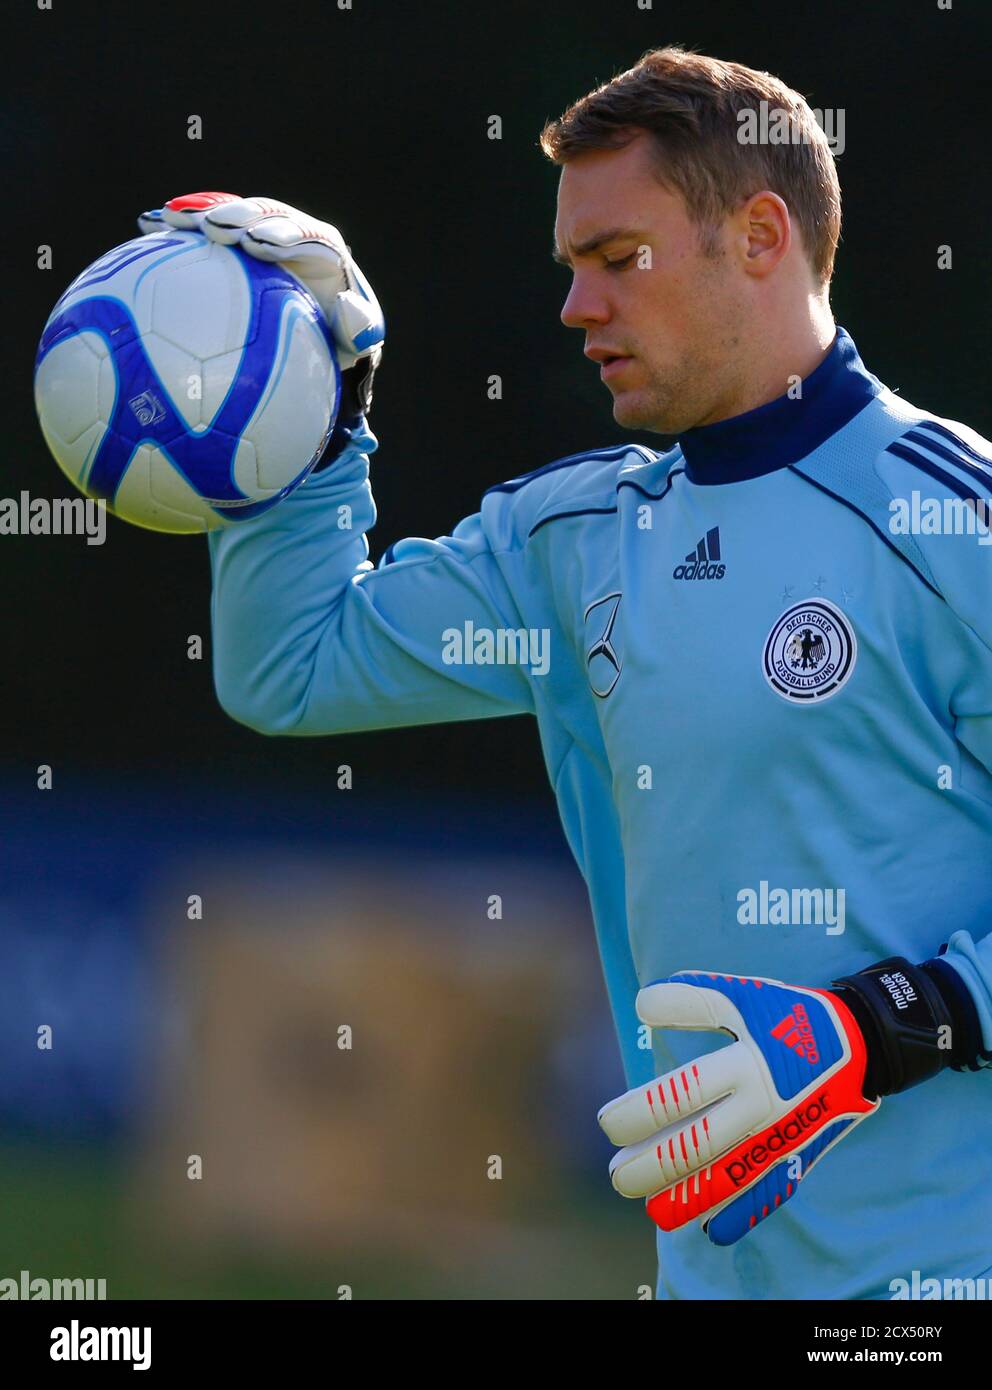 Manuel Neuer, goalkeeper of Germany's national soccer team warms up with  the ball used by the Irish team during a practice session in Frankfurt,  October 10, 2012. Germany will play two World